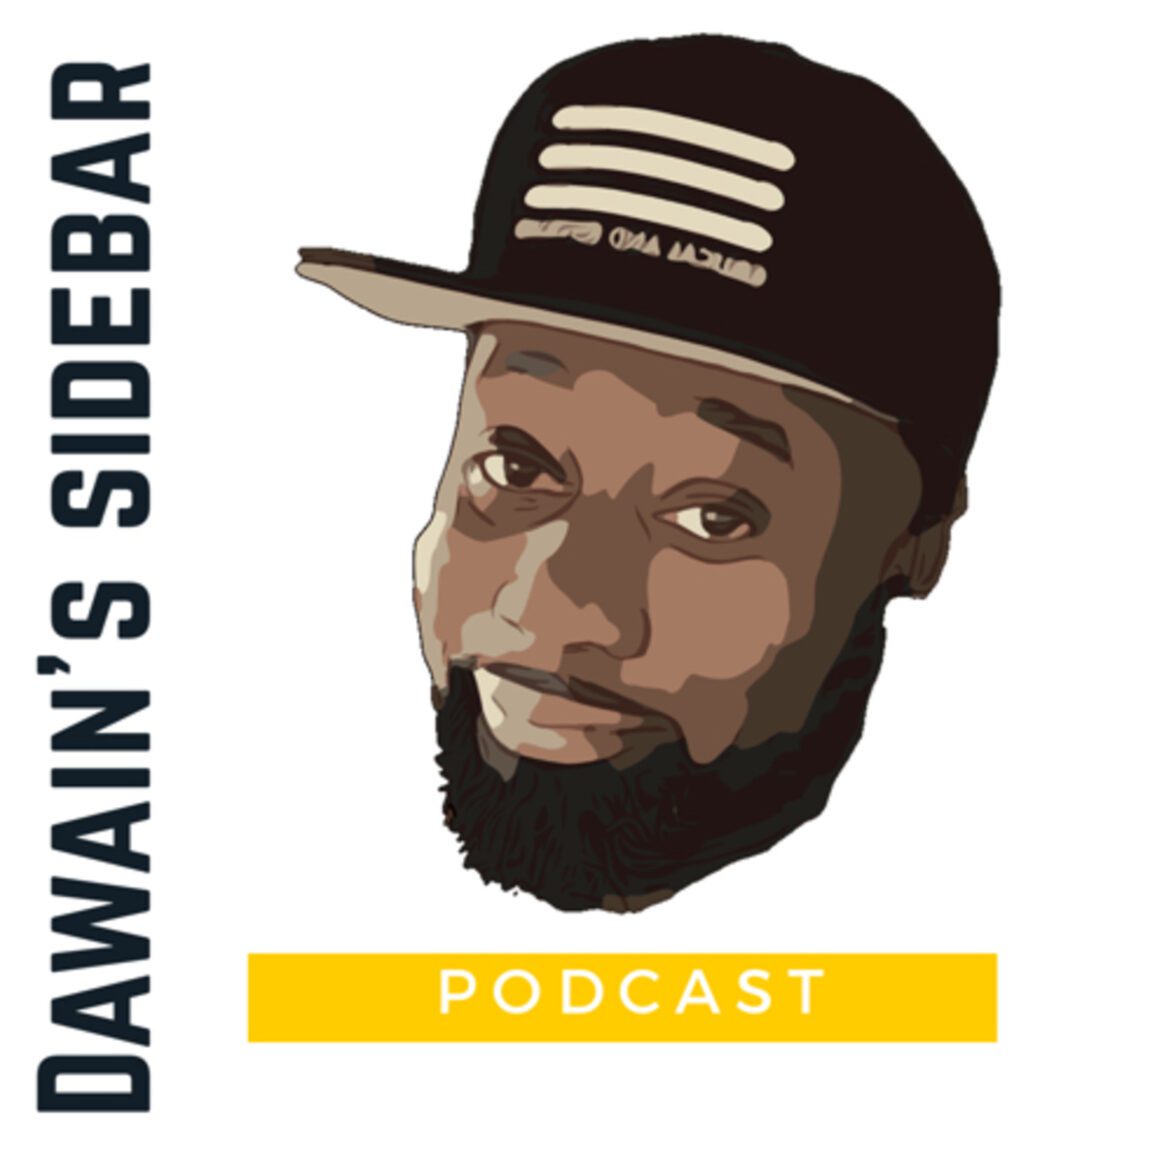 Black Podcasting - Dawain's SideBAR Let's Talk About Podcasting